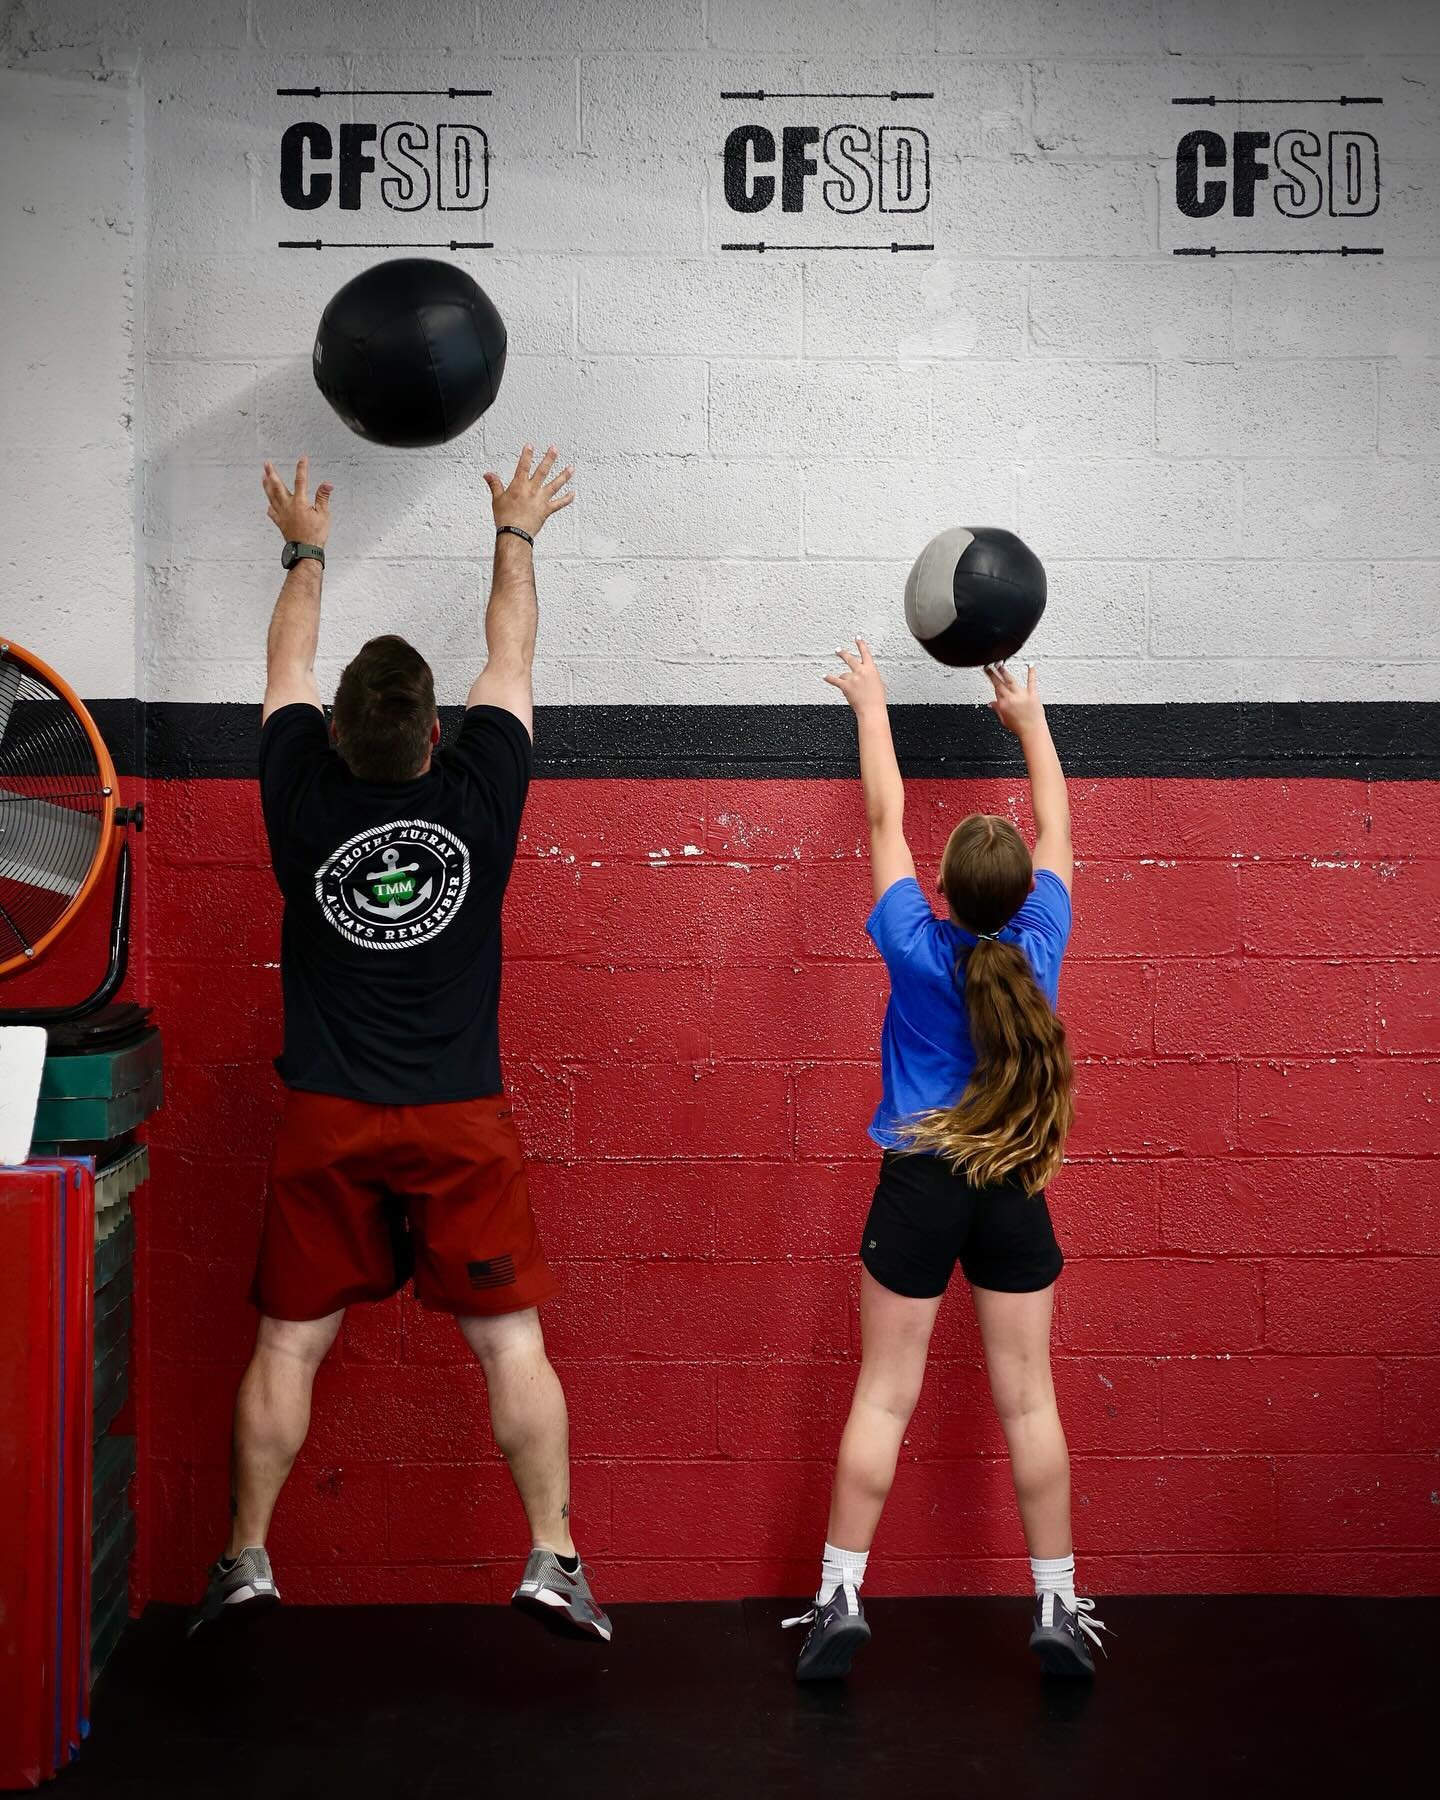 Families that slay together - stay together. Nothing better than a father/daughter or partner workout. #strongmantraining #strongman #strongwoman #longislandsstrongest #listrong #longislandstrong